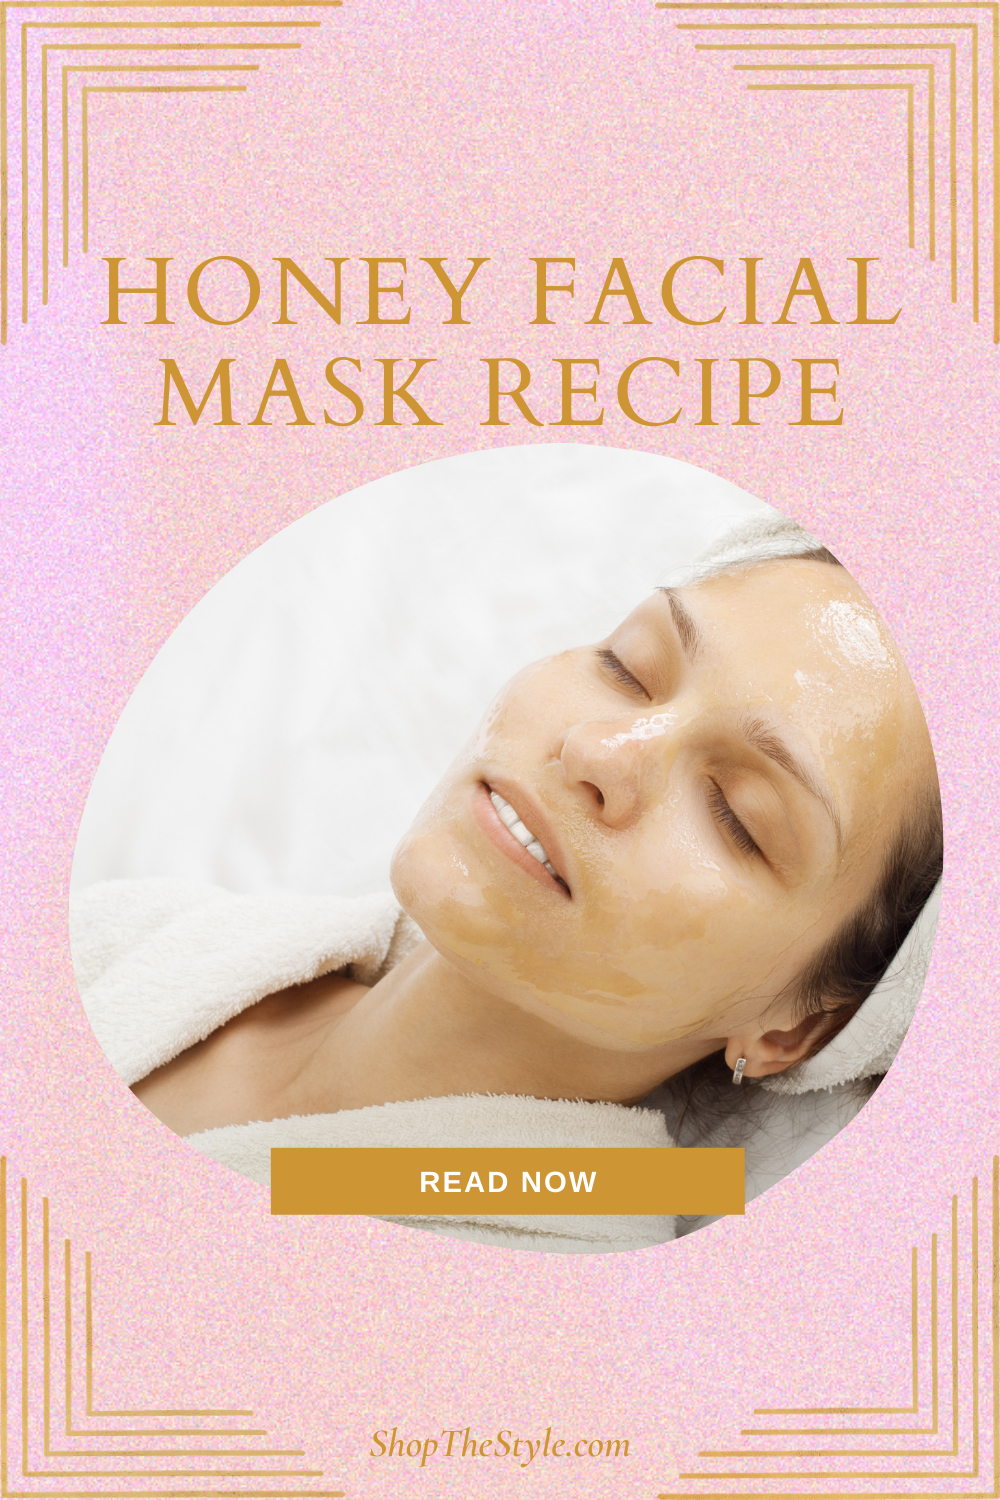 This honey facial mask is great for those who want to achieve softer, more youthful skin. The honey helps to hydrate and nourish the skin, while the olive oil and lemon juice work together to brighten and revitalize it.